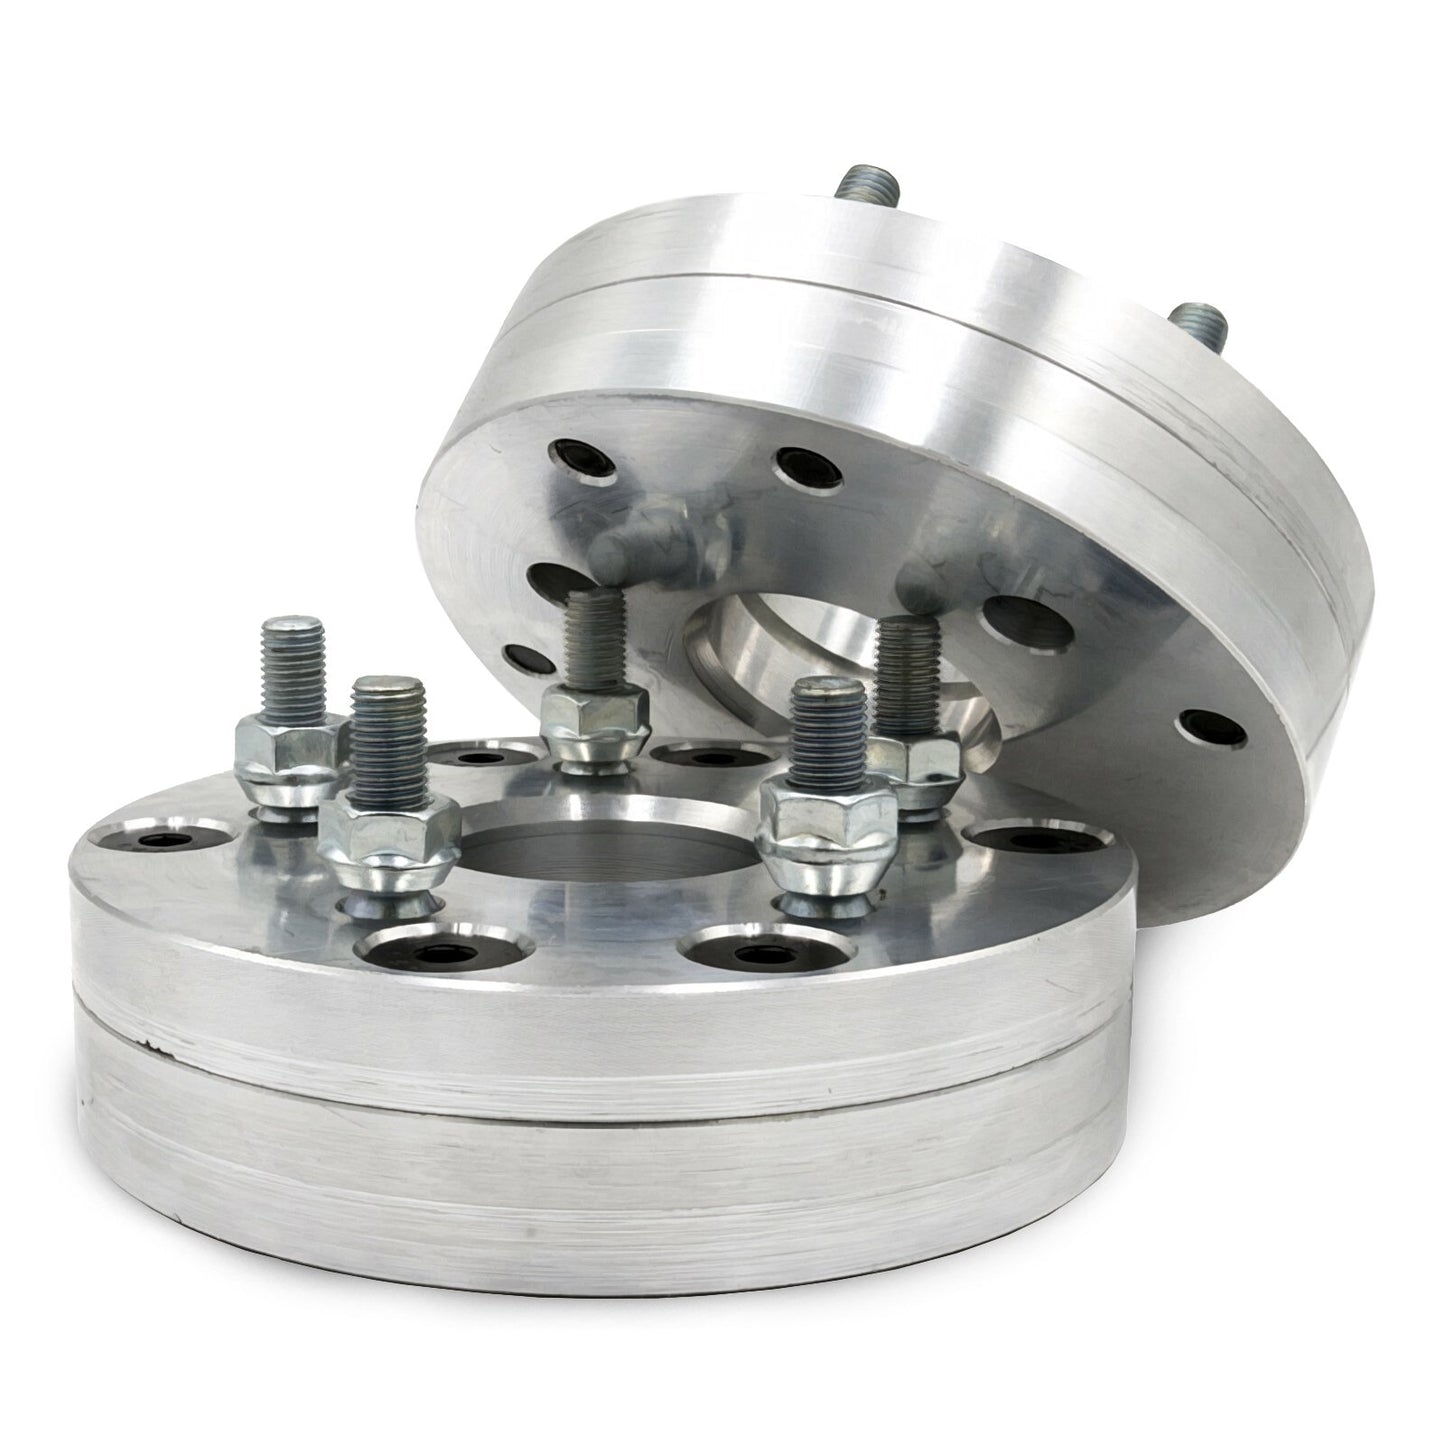 4x140 to 5x4.5" 2 piece Wheel Adapter - Thickness: 1.5" - 3"